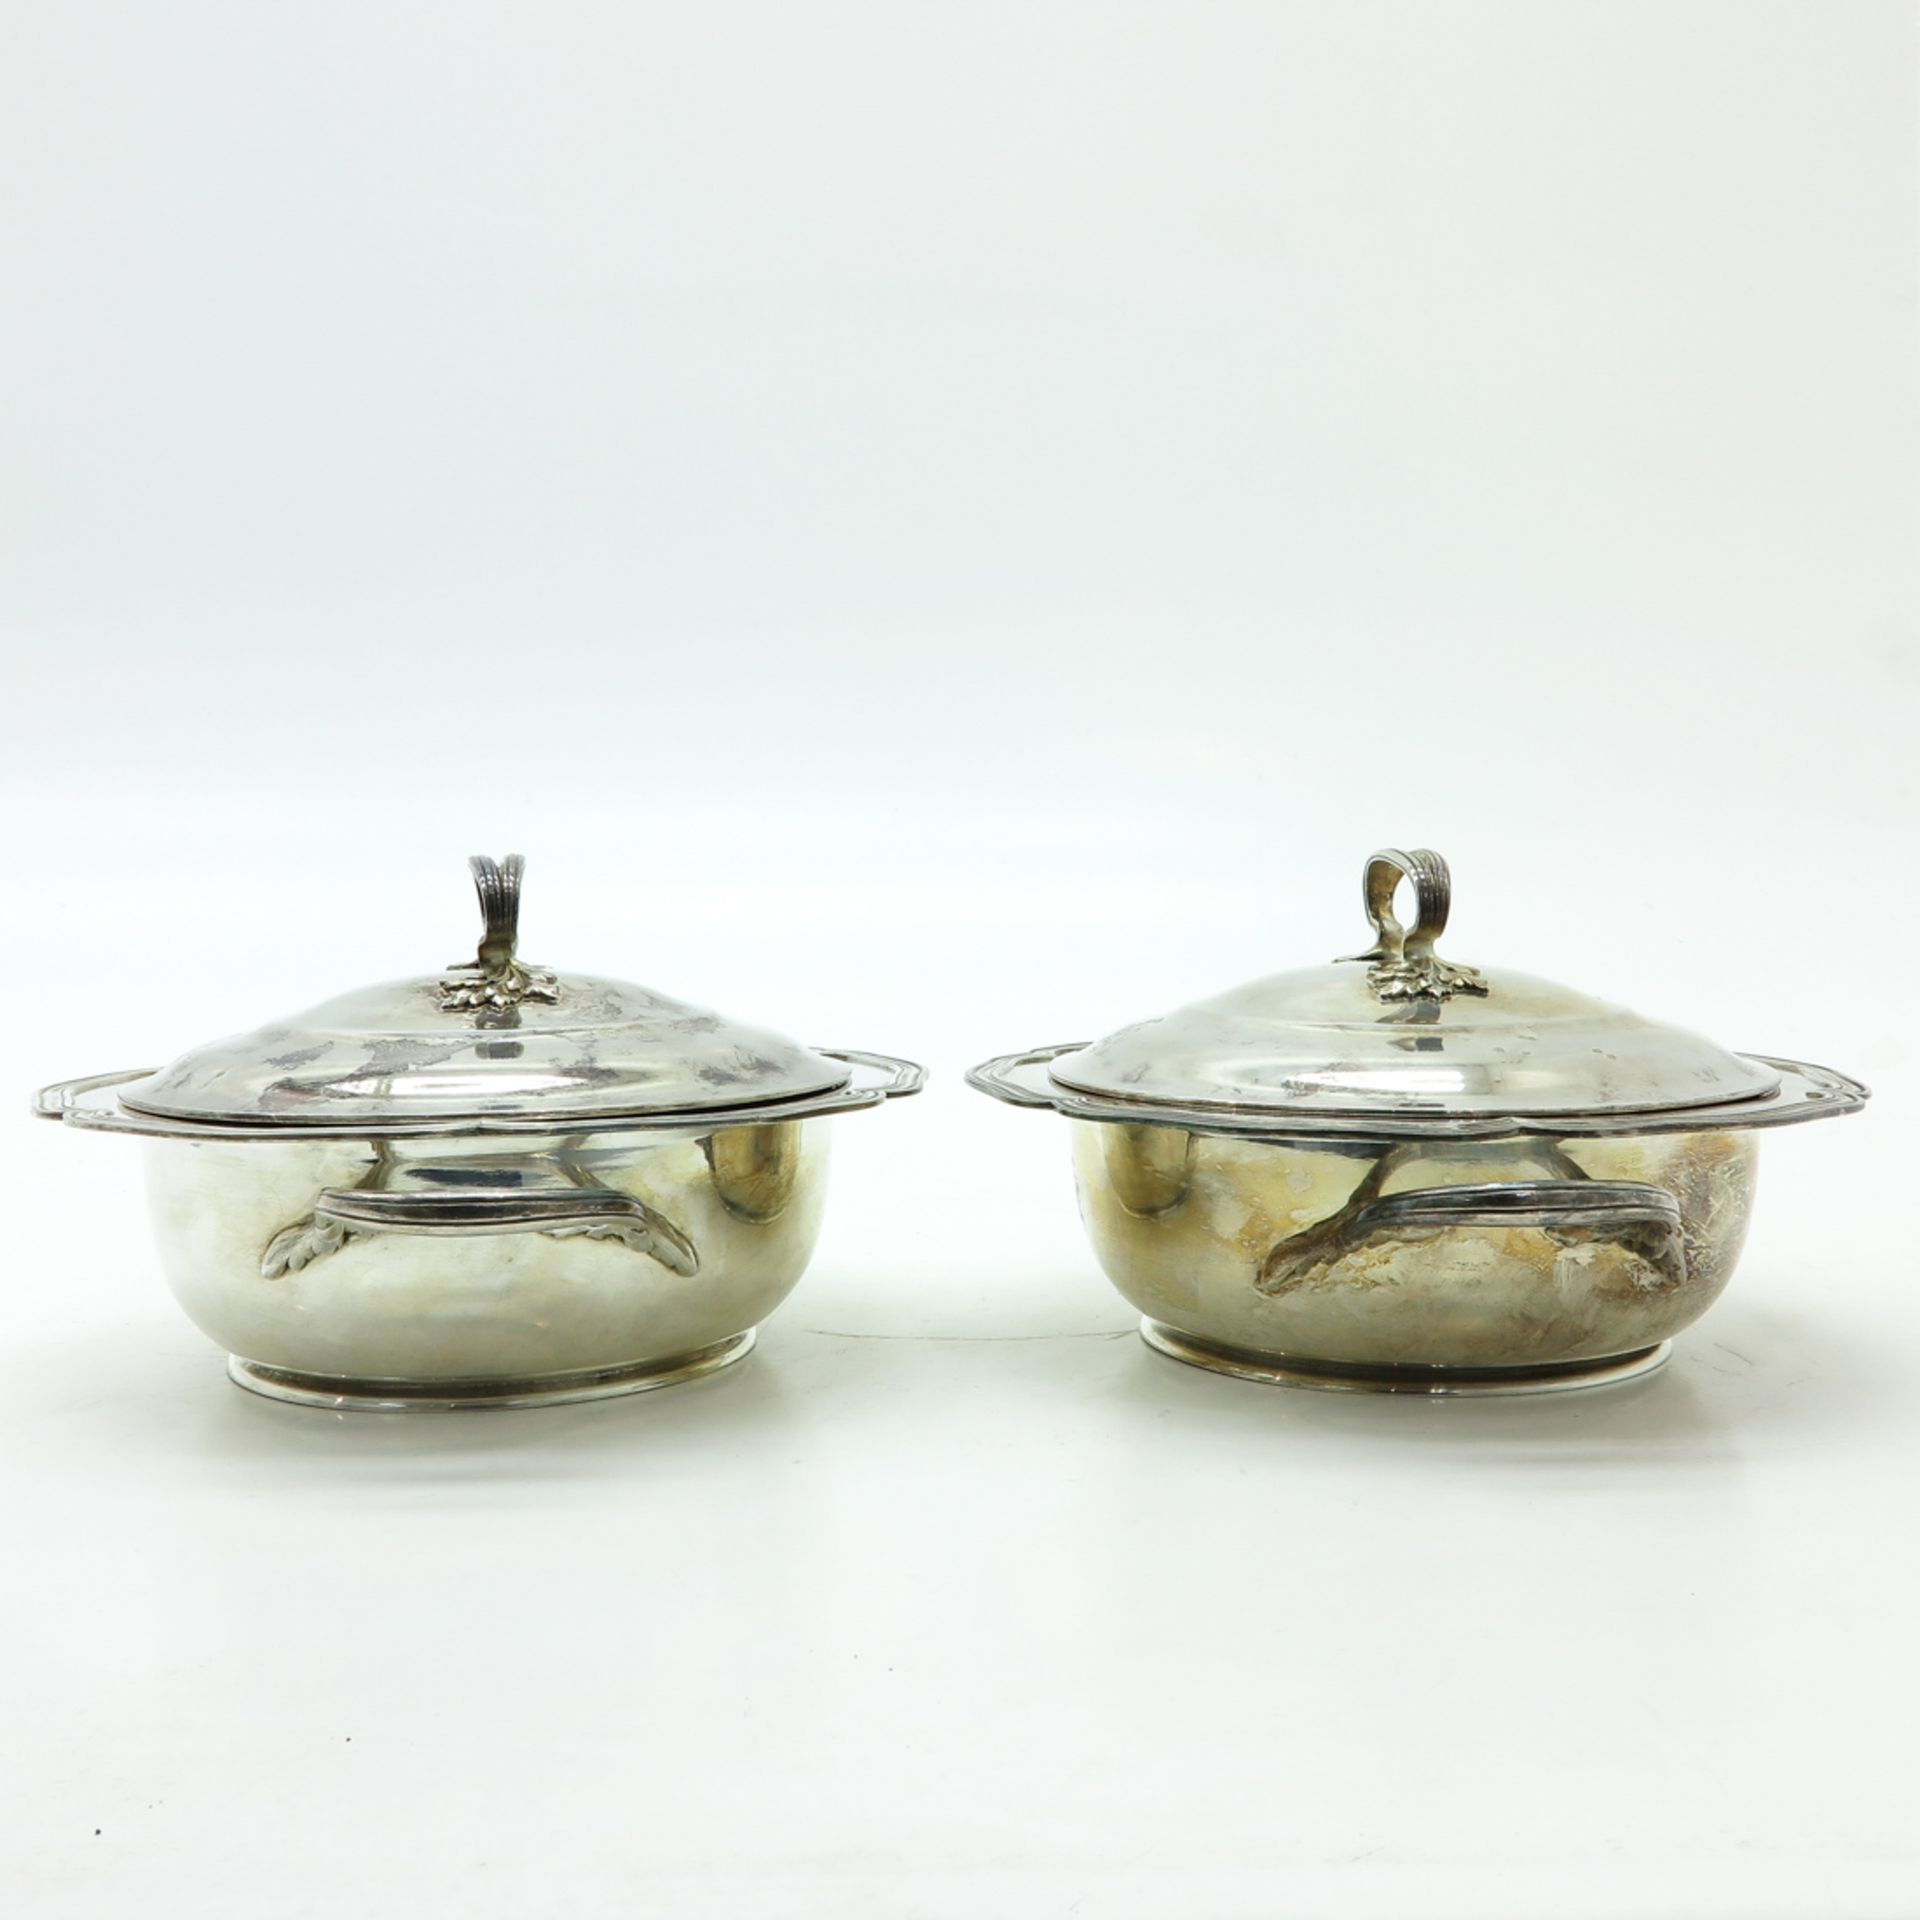 Lot of 2 Silver Wolfers Covered Serving Dishes - Bild 4 aus 7